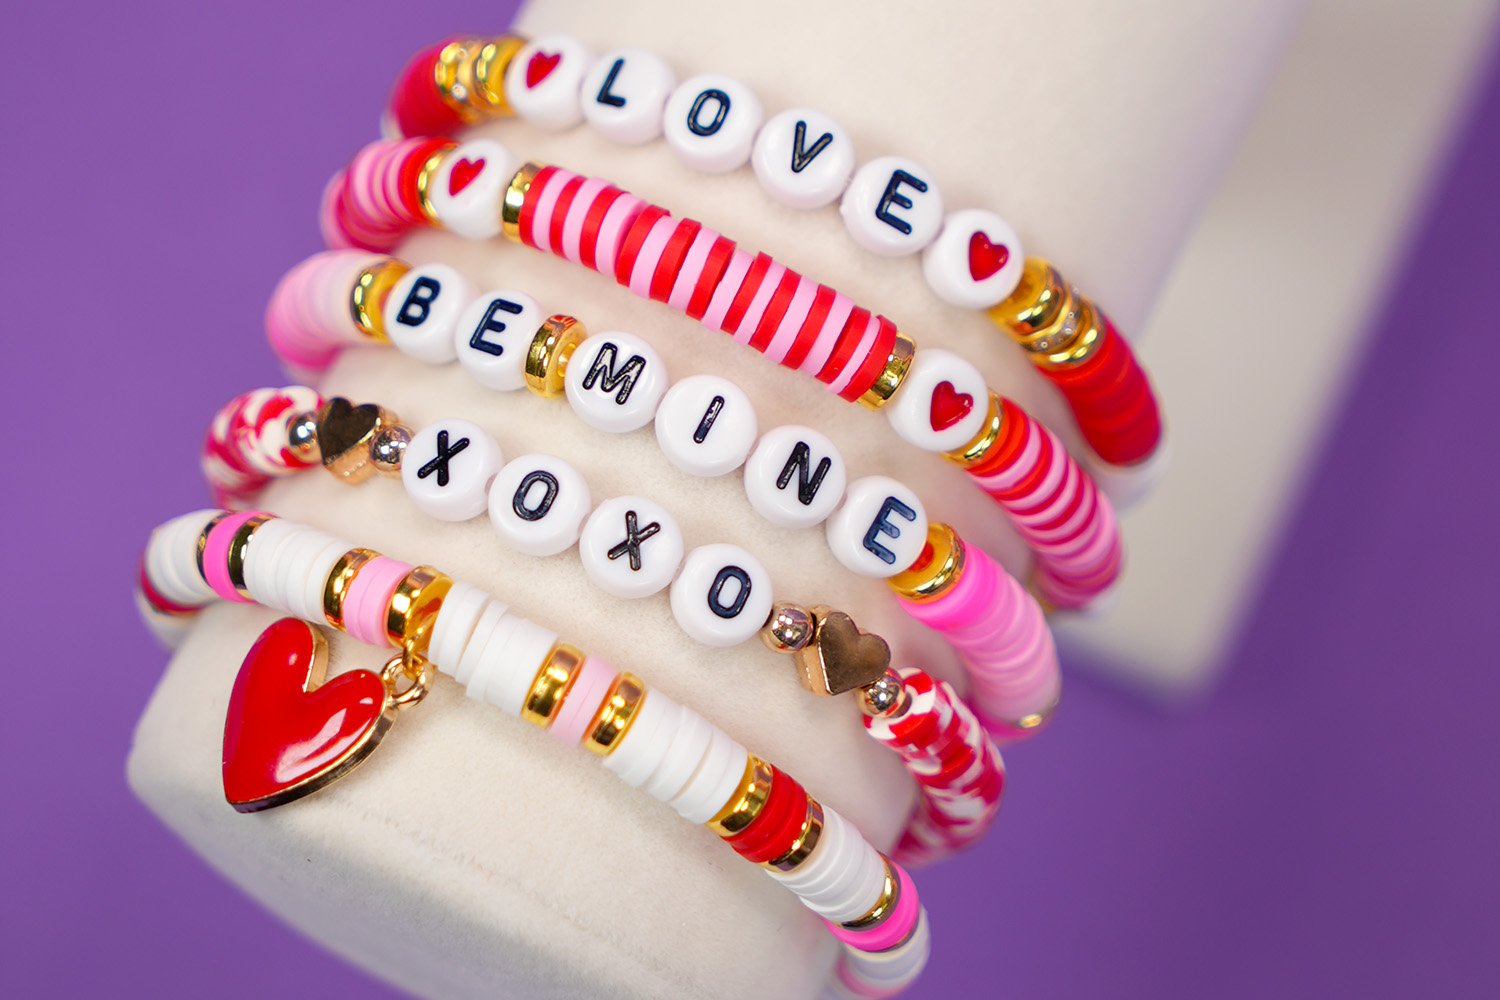 Close up of Valentine's Day bracelets with pink, red, and white beads and "LOVE," "BE MINE," and "XOXO" beads